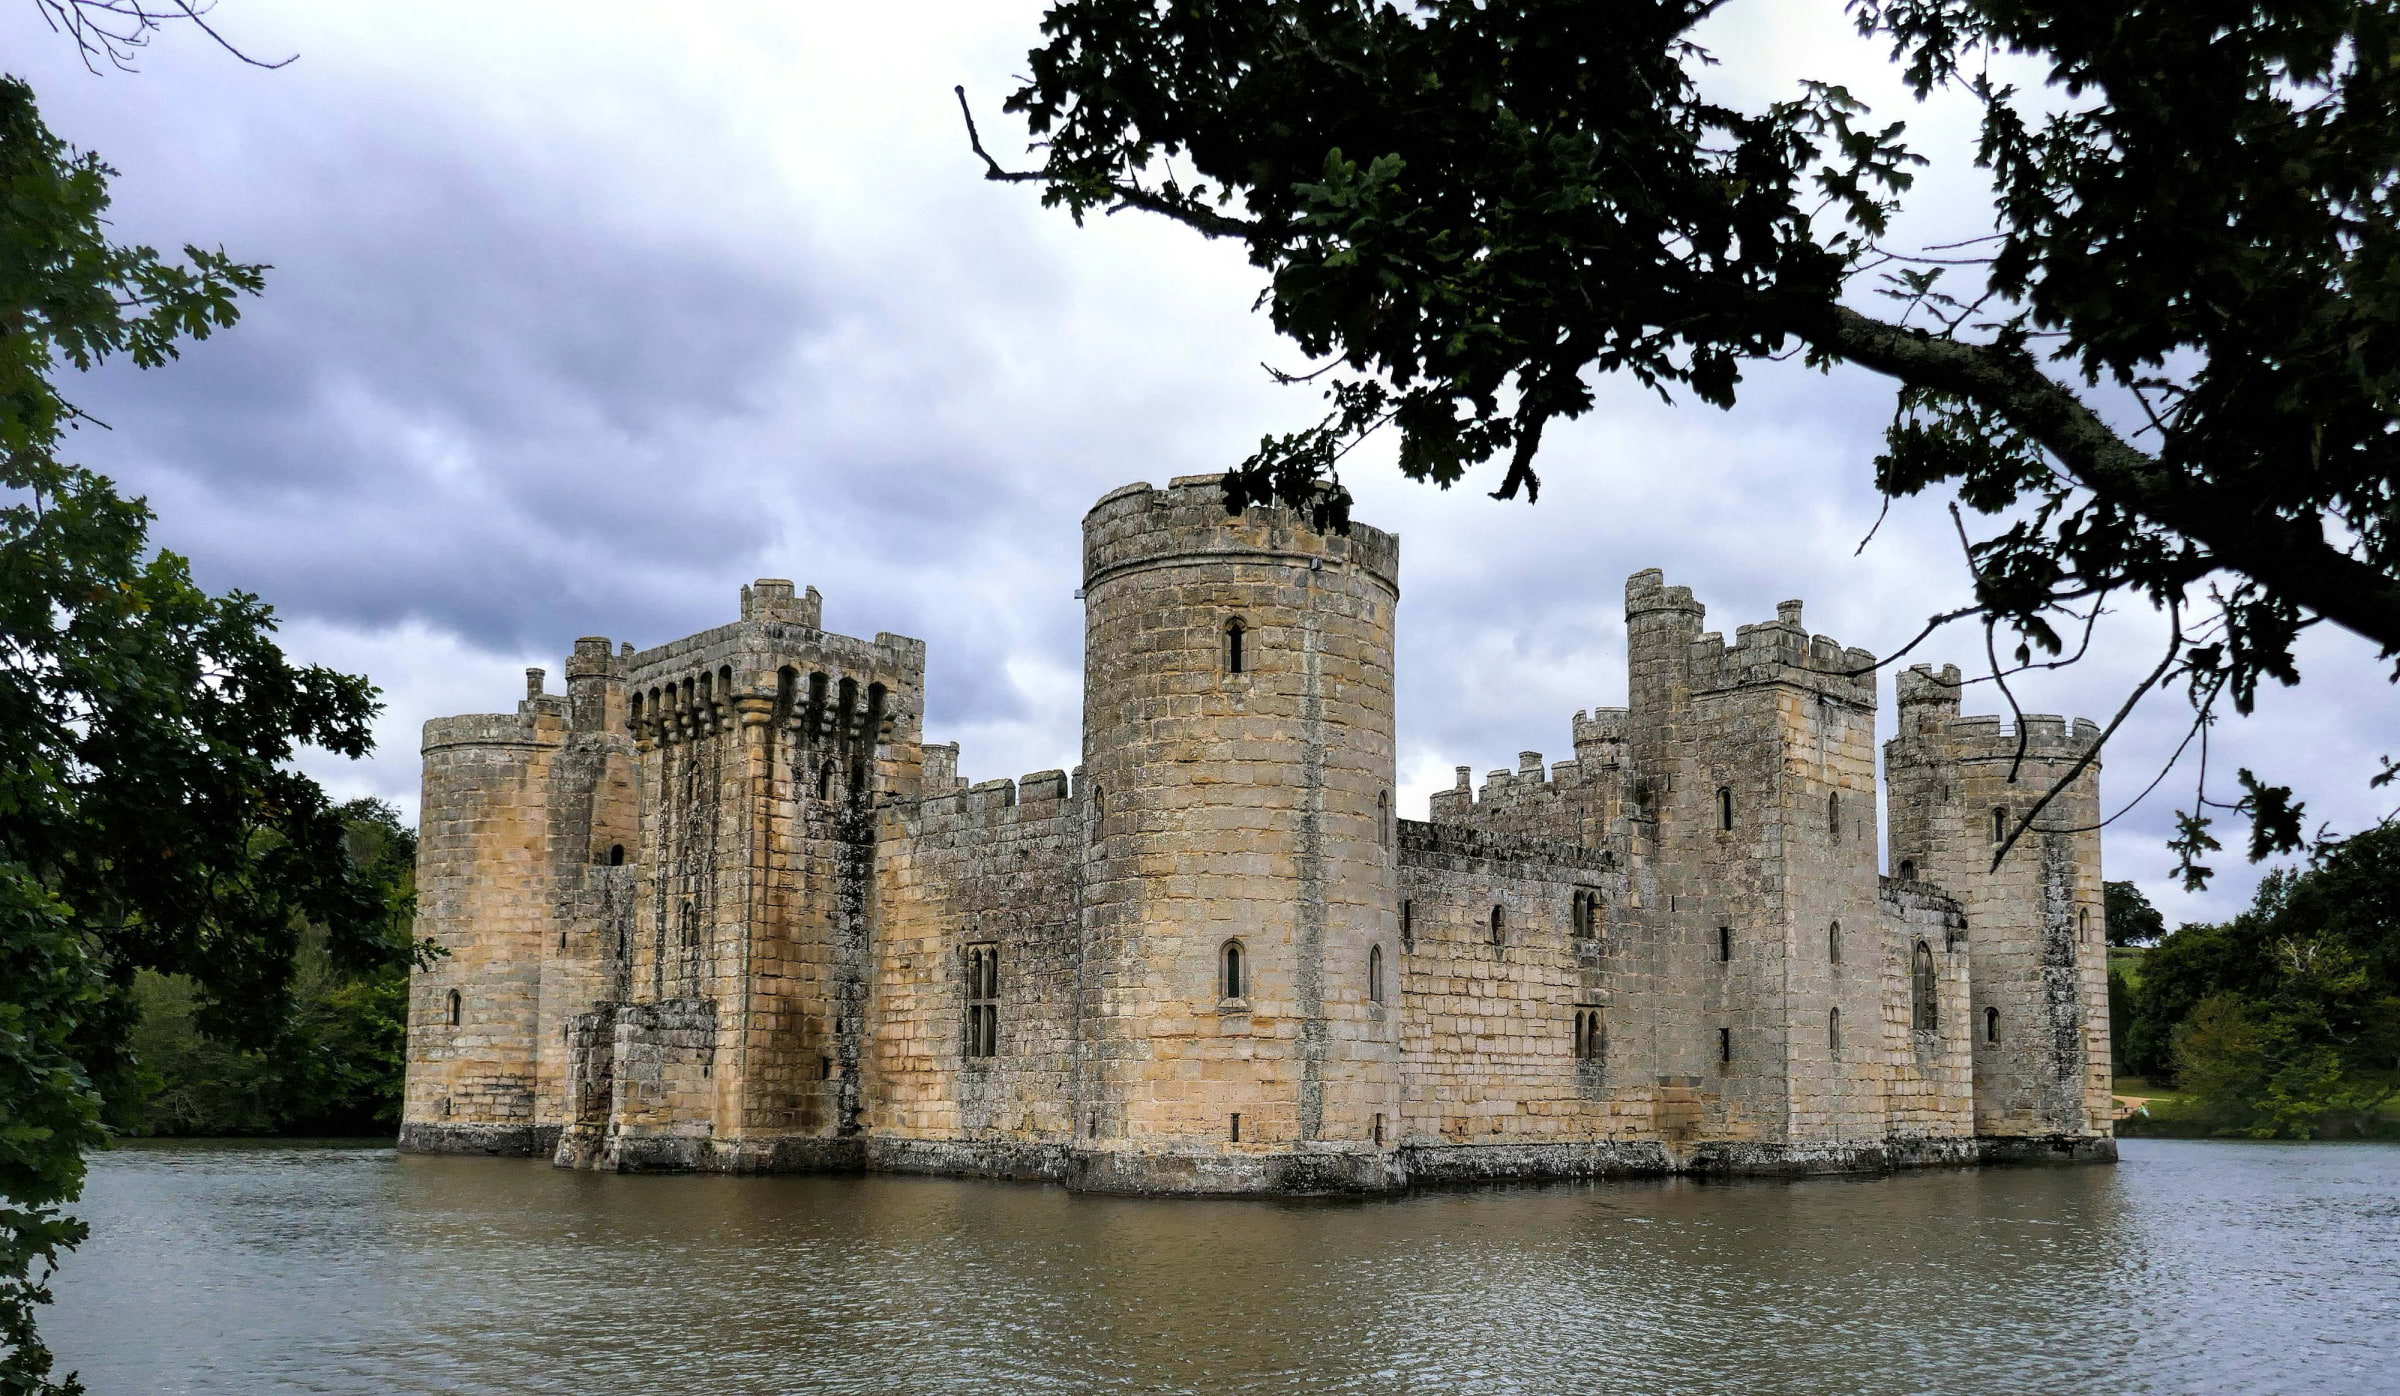 Guide to castles near London